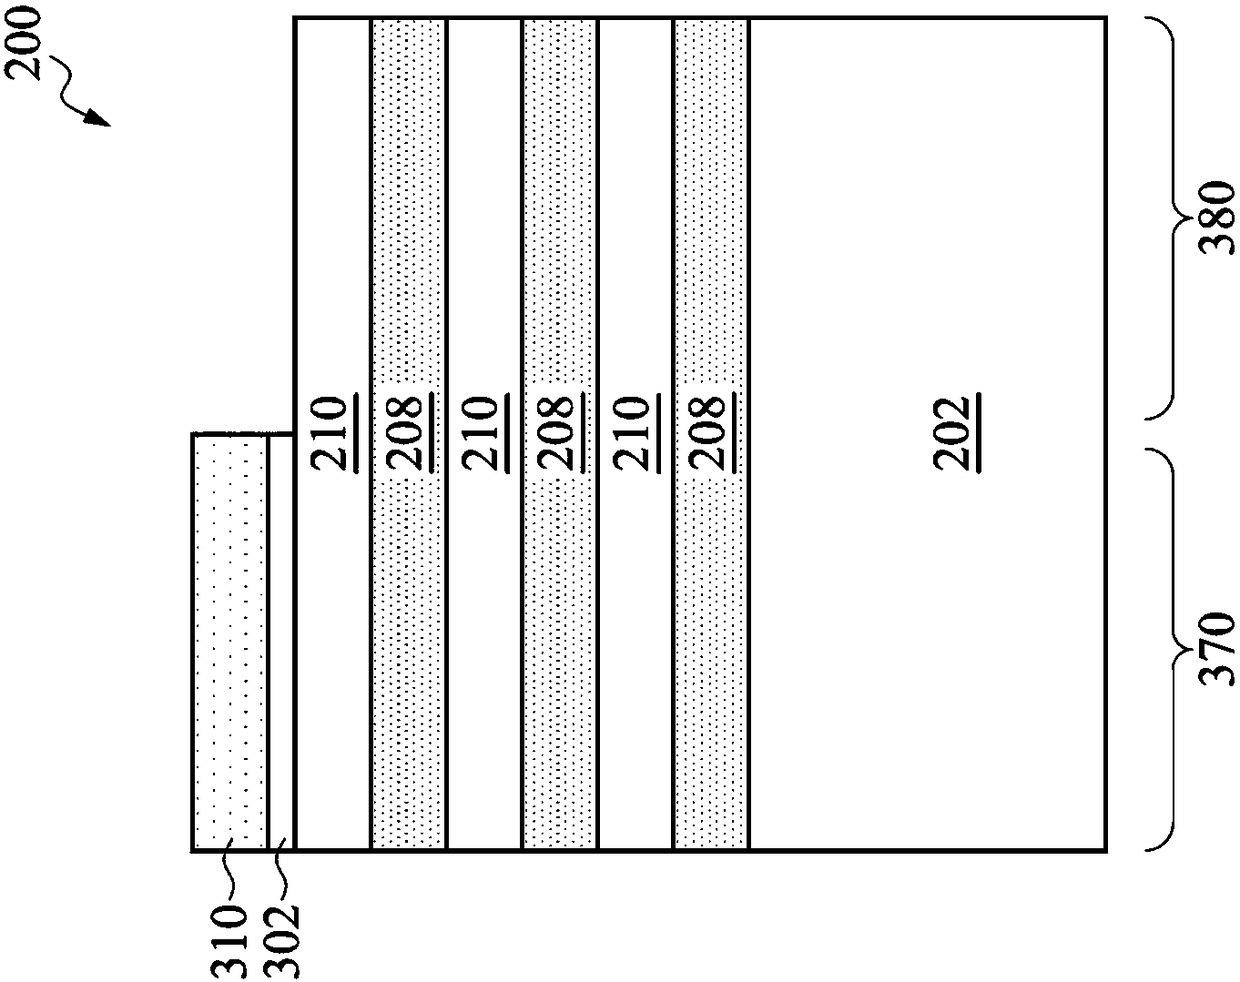 Isolation manufacturing method for semiconductor structures